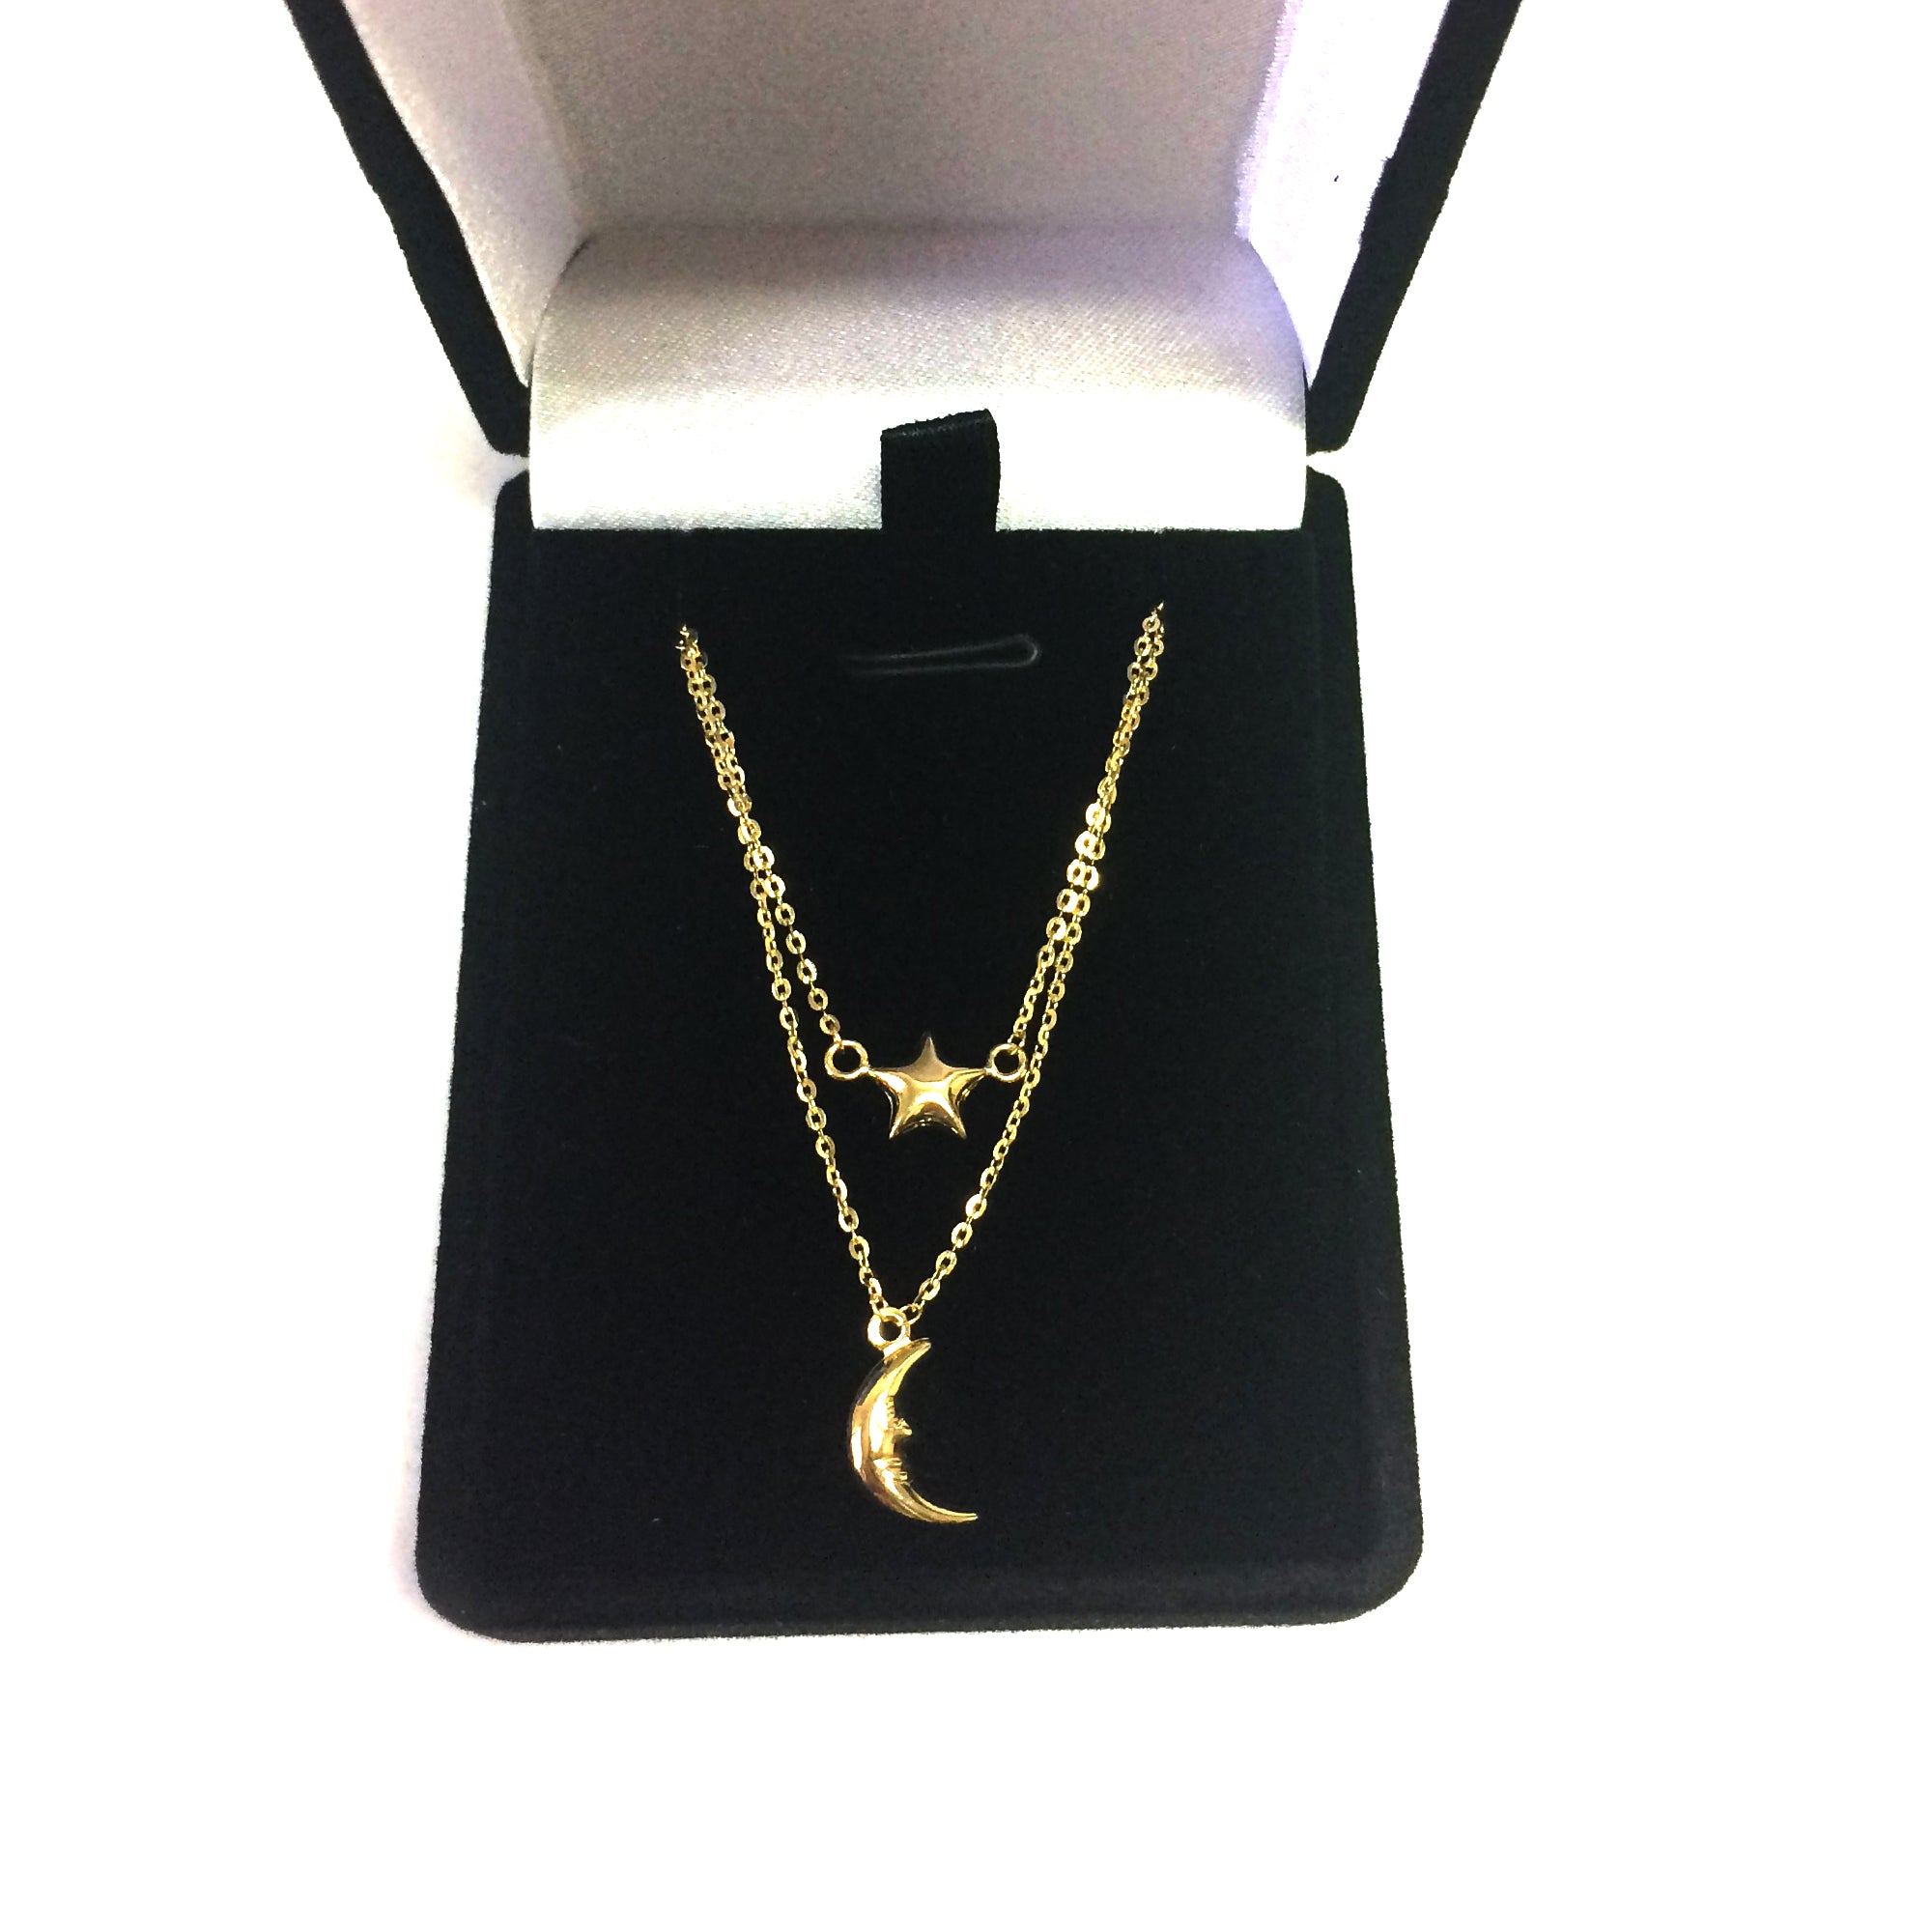 14k Yellow Gold Moon And Star On Single In to Double Graduated Strand Necklace, 18"